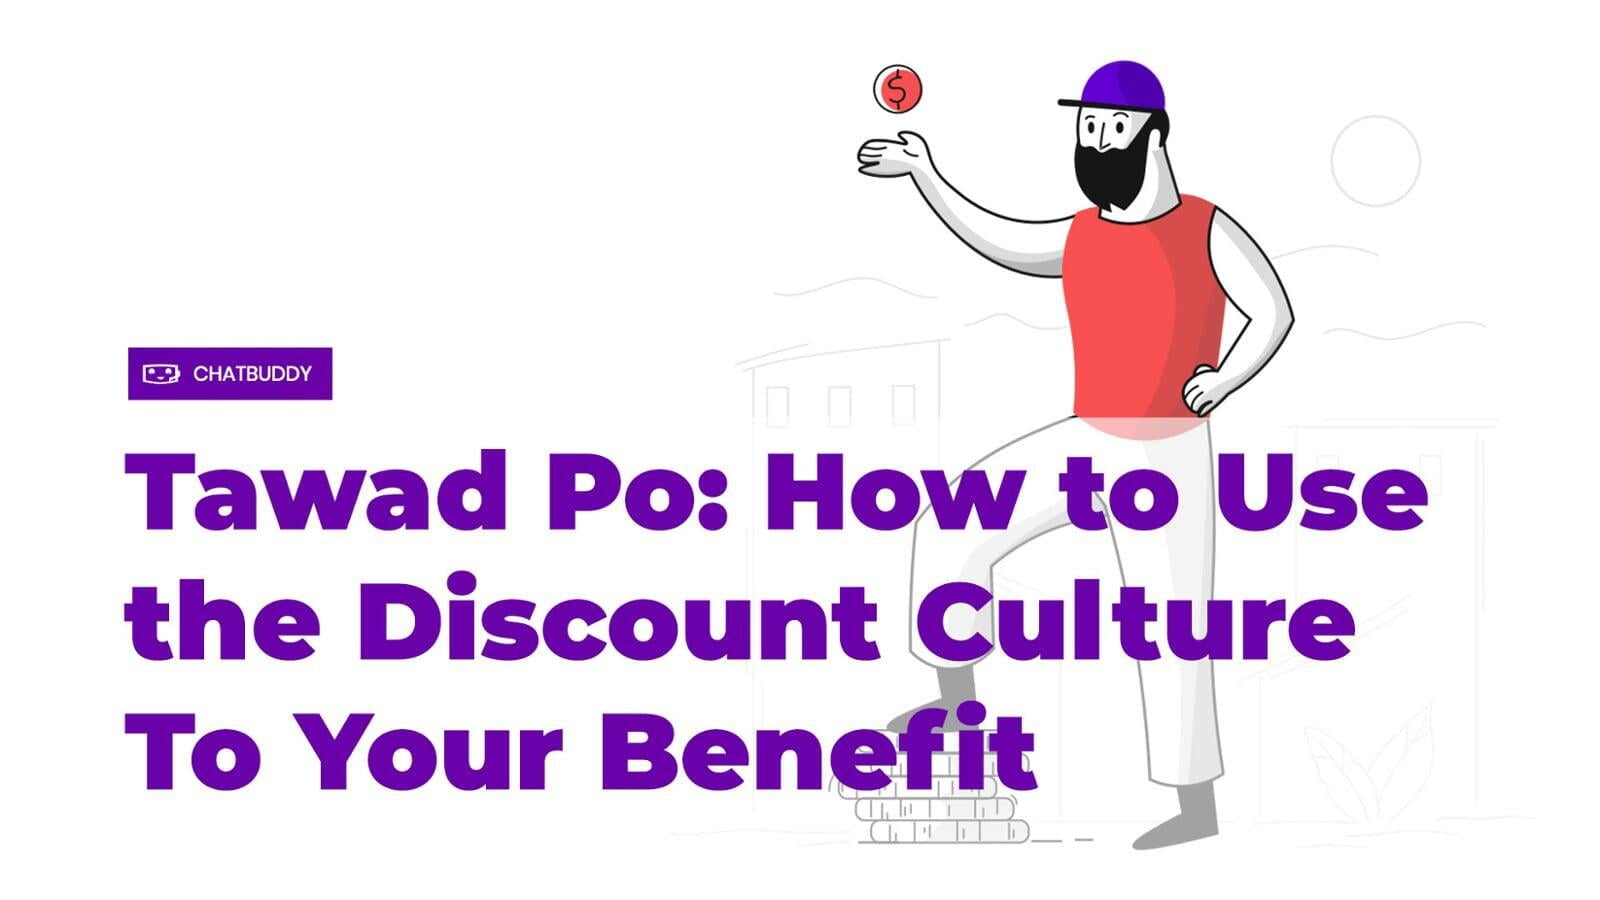 Tawad Po: How to Use the Discount Culture To Your Benefit